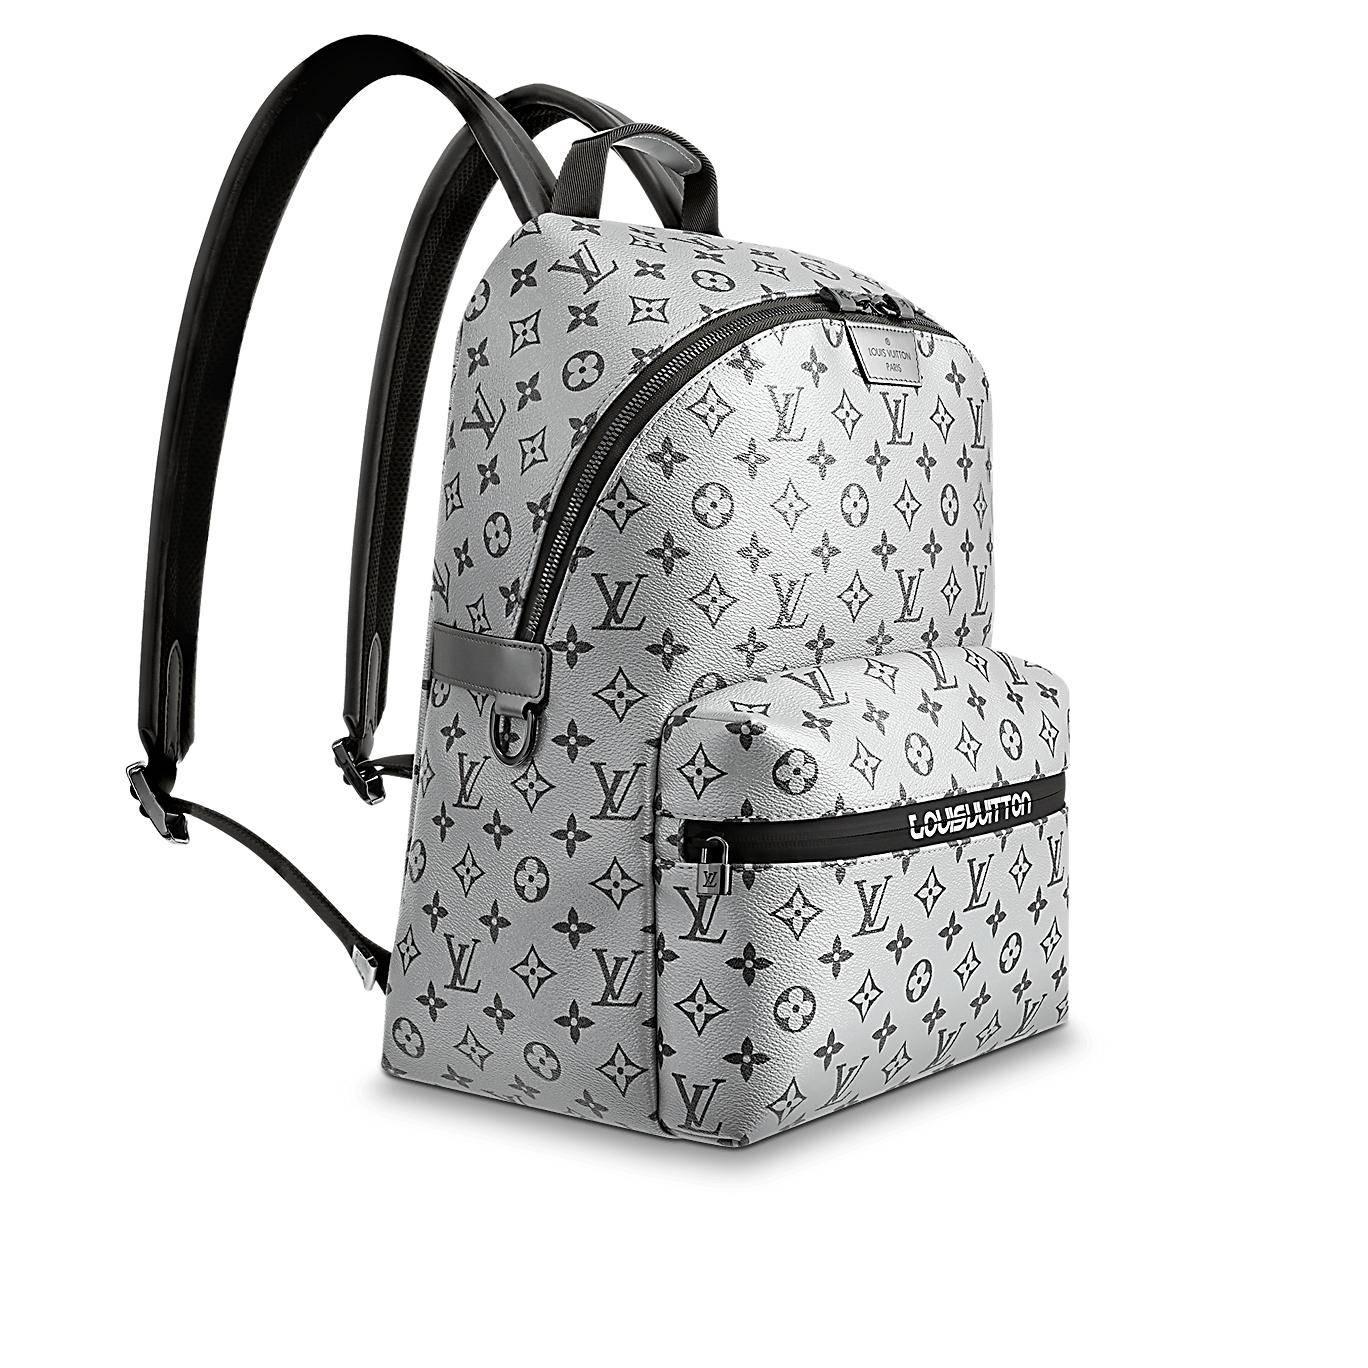 RARE AND HIGHLY SOUGHT AFTER
Apollo Backpack - Monogram Silver 
Crafted of Monogram Silver Reflect Canvas
Extremely limited production - a runway masterpiece -
One of the most talked about designs by legendary designer Kim Jones.
2 Adjustable